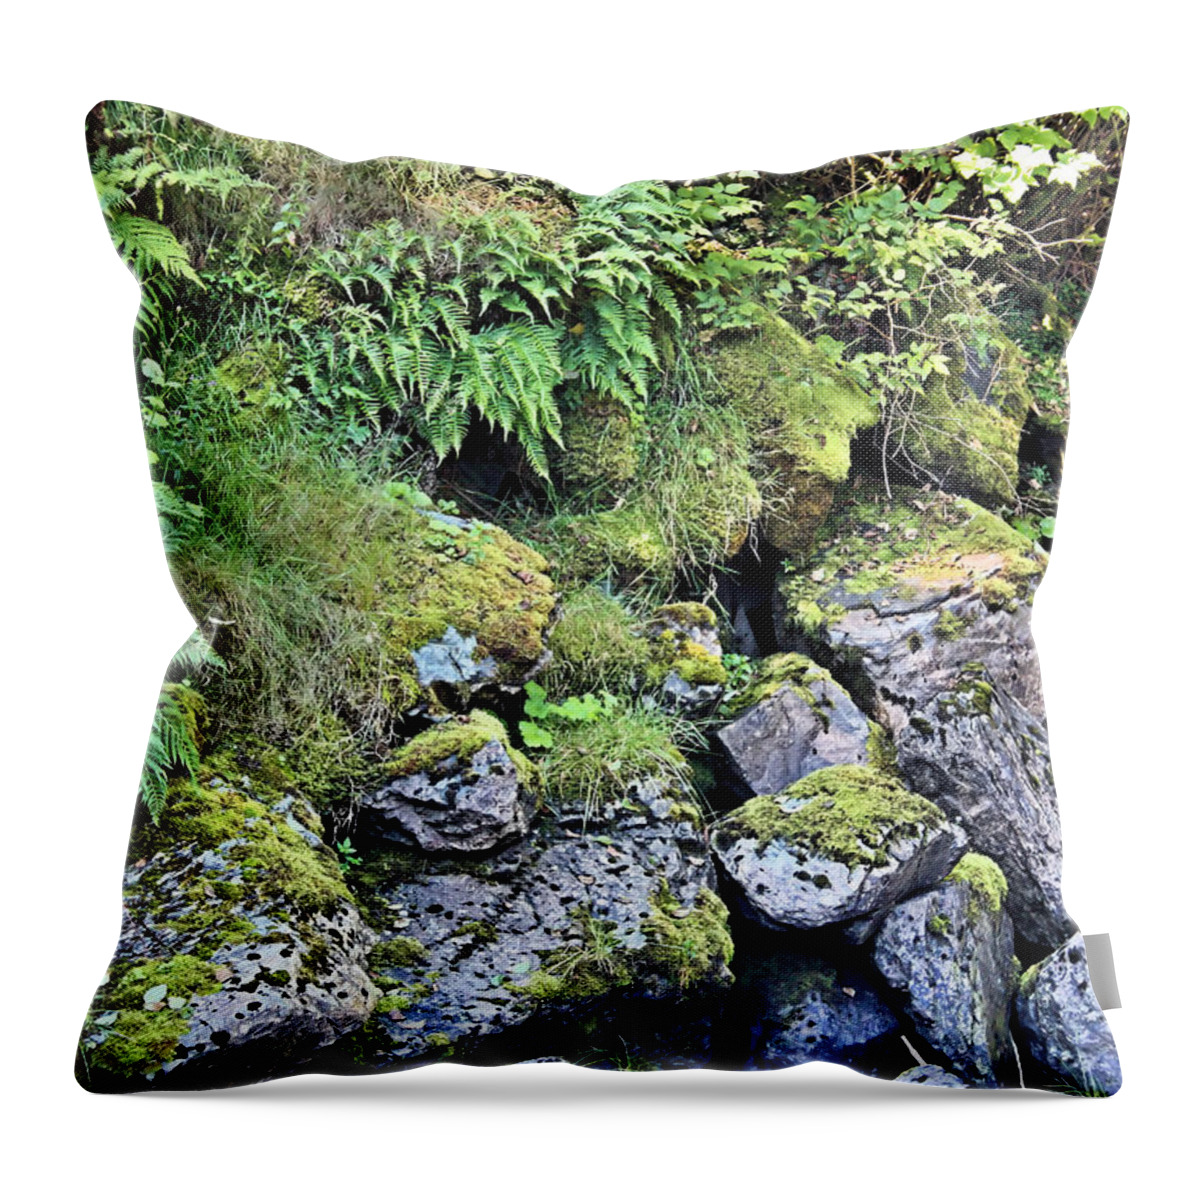 Tongass National Forest Throw Pillow featuring the photograph Tongass Fern by Kristin Elmquist